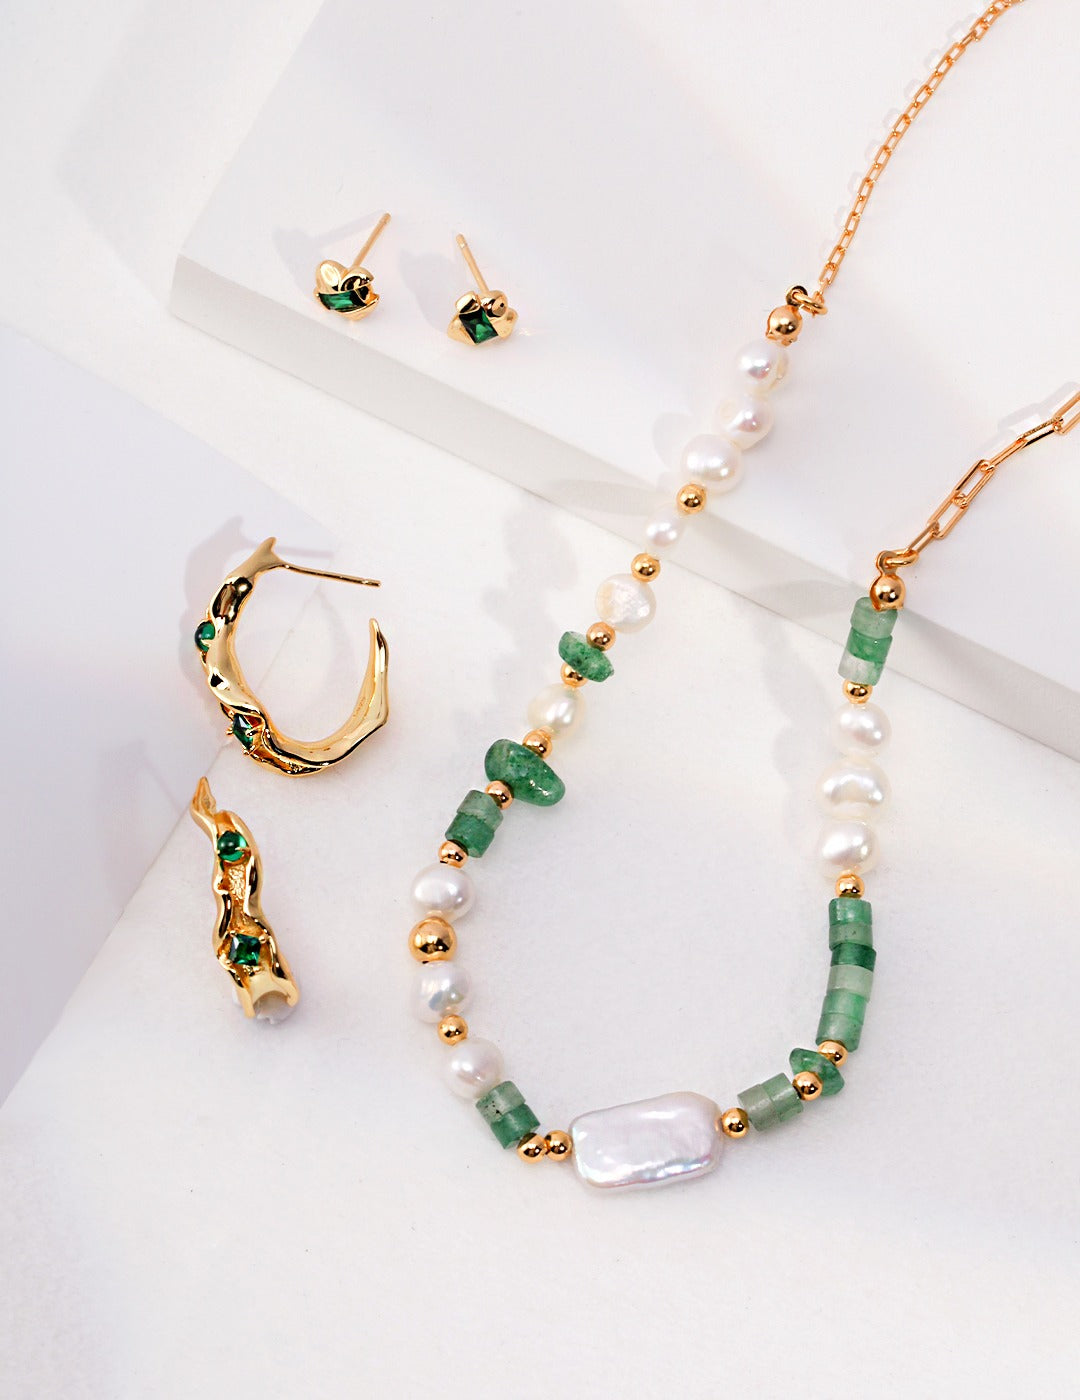 Vintage Elegance: Silver Pearl Necklace with Dongling Jade and Green Strawberry Crystal Chips